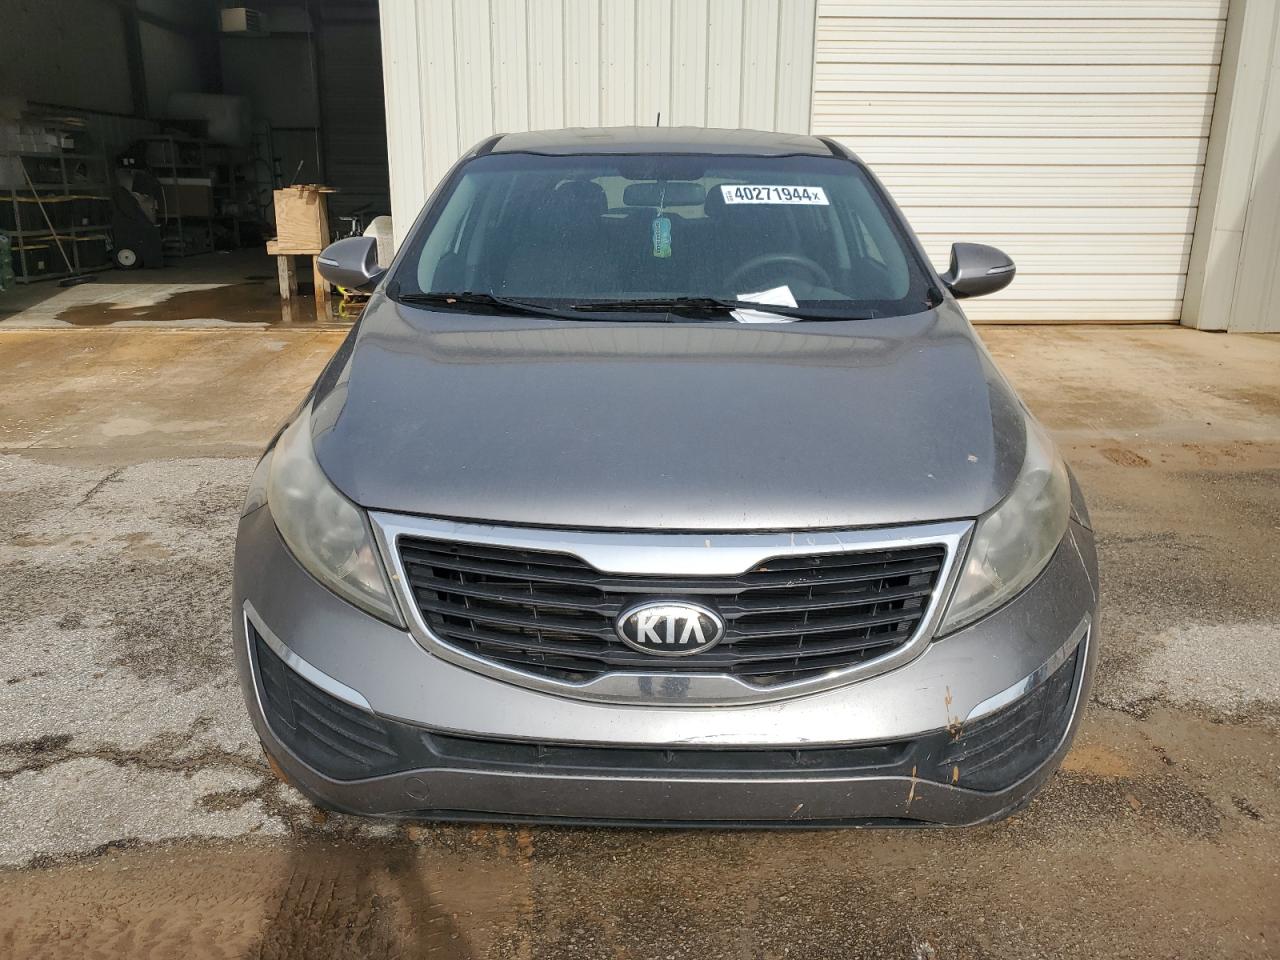 KNDPB3A25D7****** Used and Repairable 2013 Kia Sportage in Alabama State